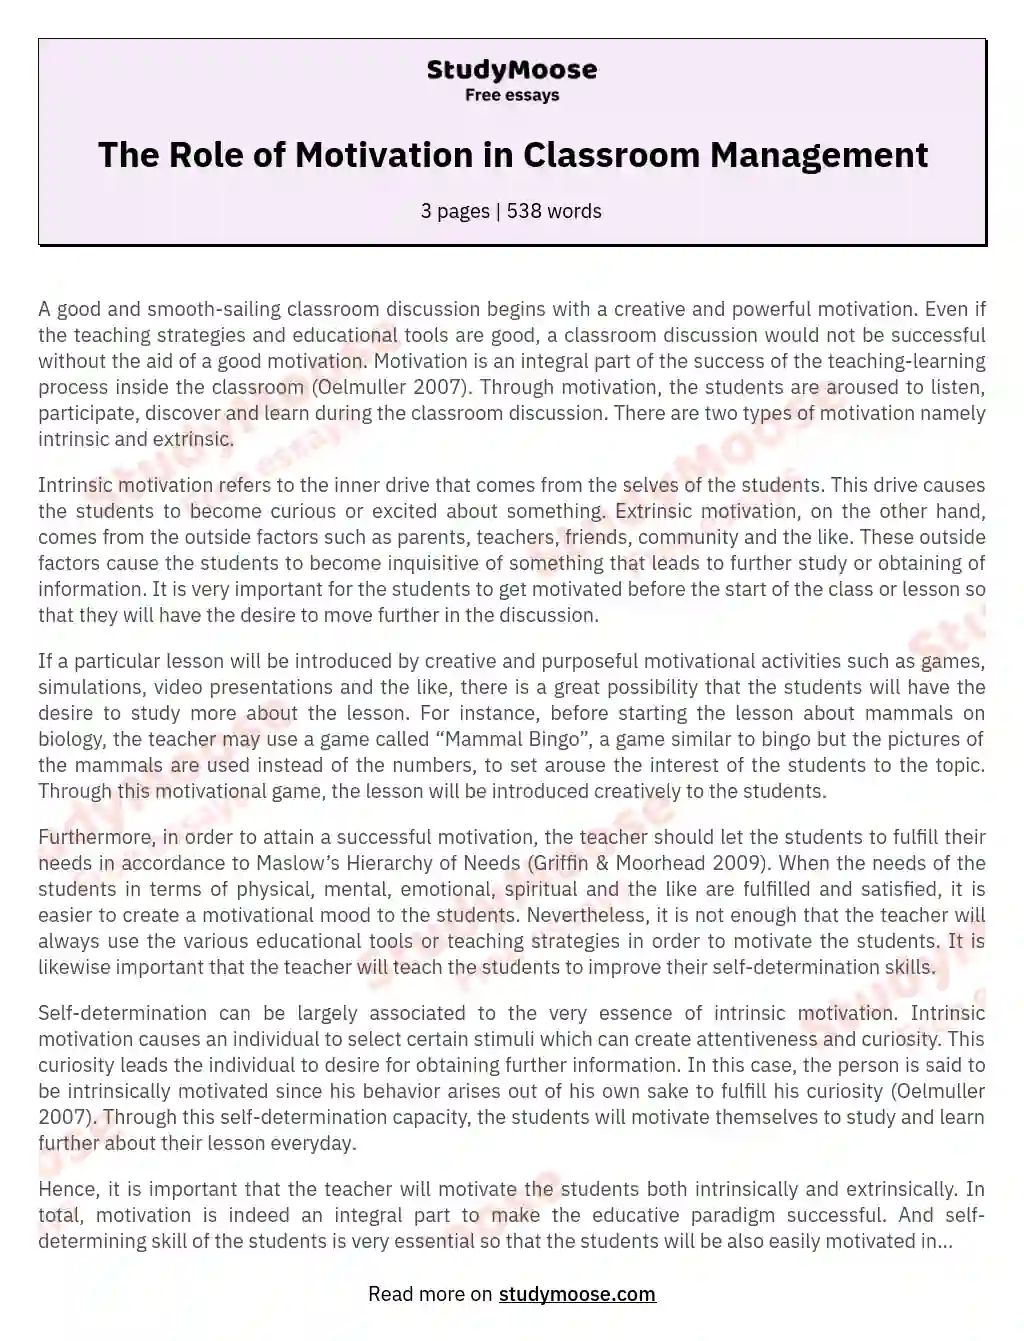 The Role of Motivation in Classroom Management essay